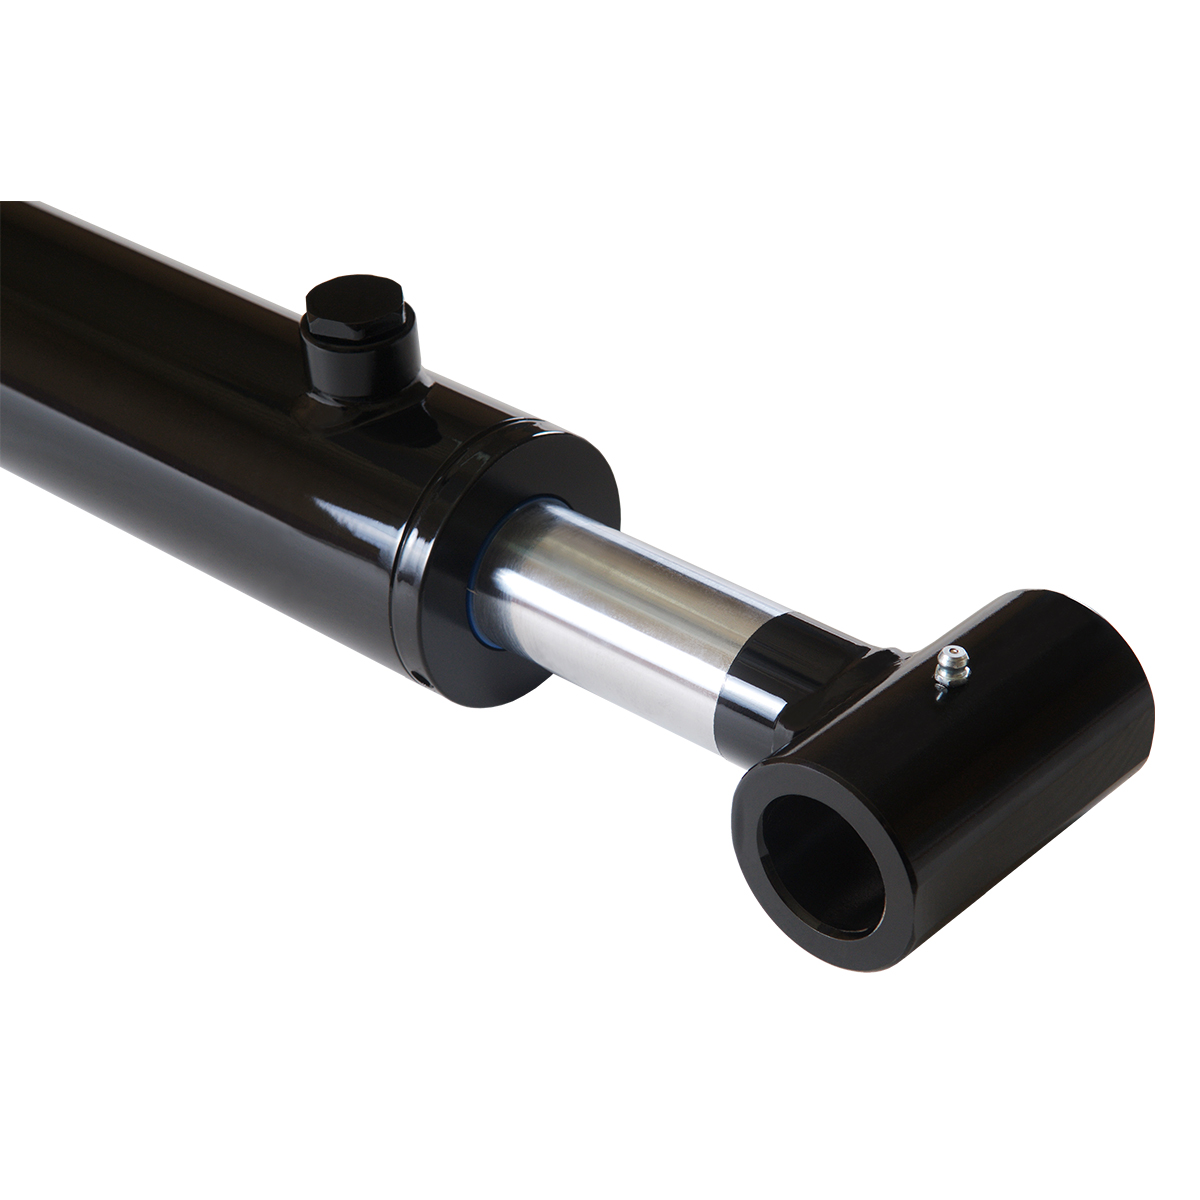 2.5 bore x 23.5 stroke hydraulic cylinder, welded loader double acting cylinder | Magister Hydraulics